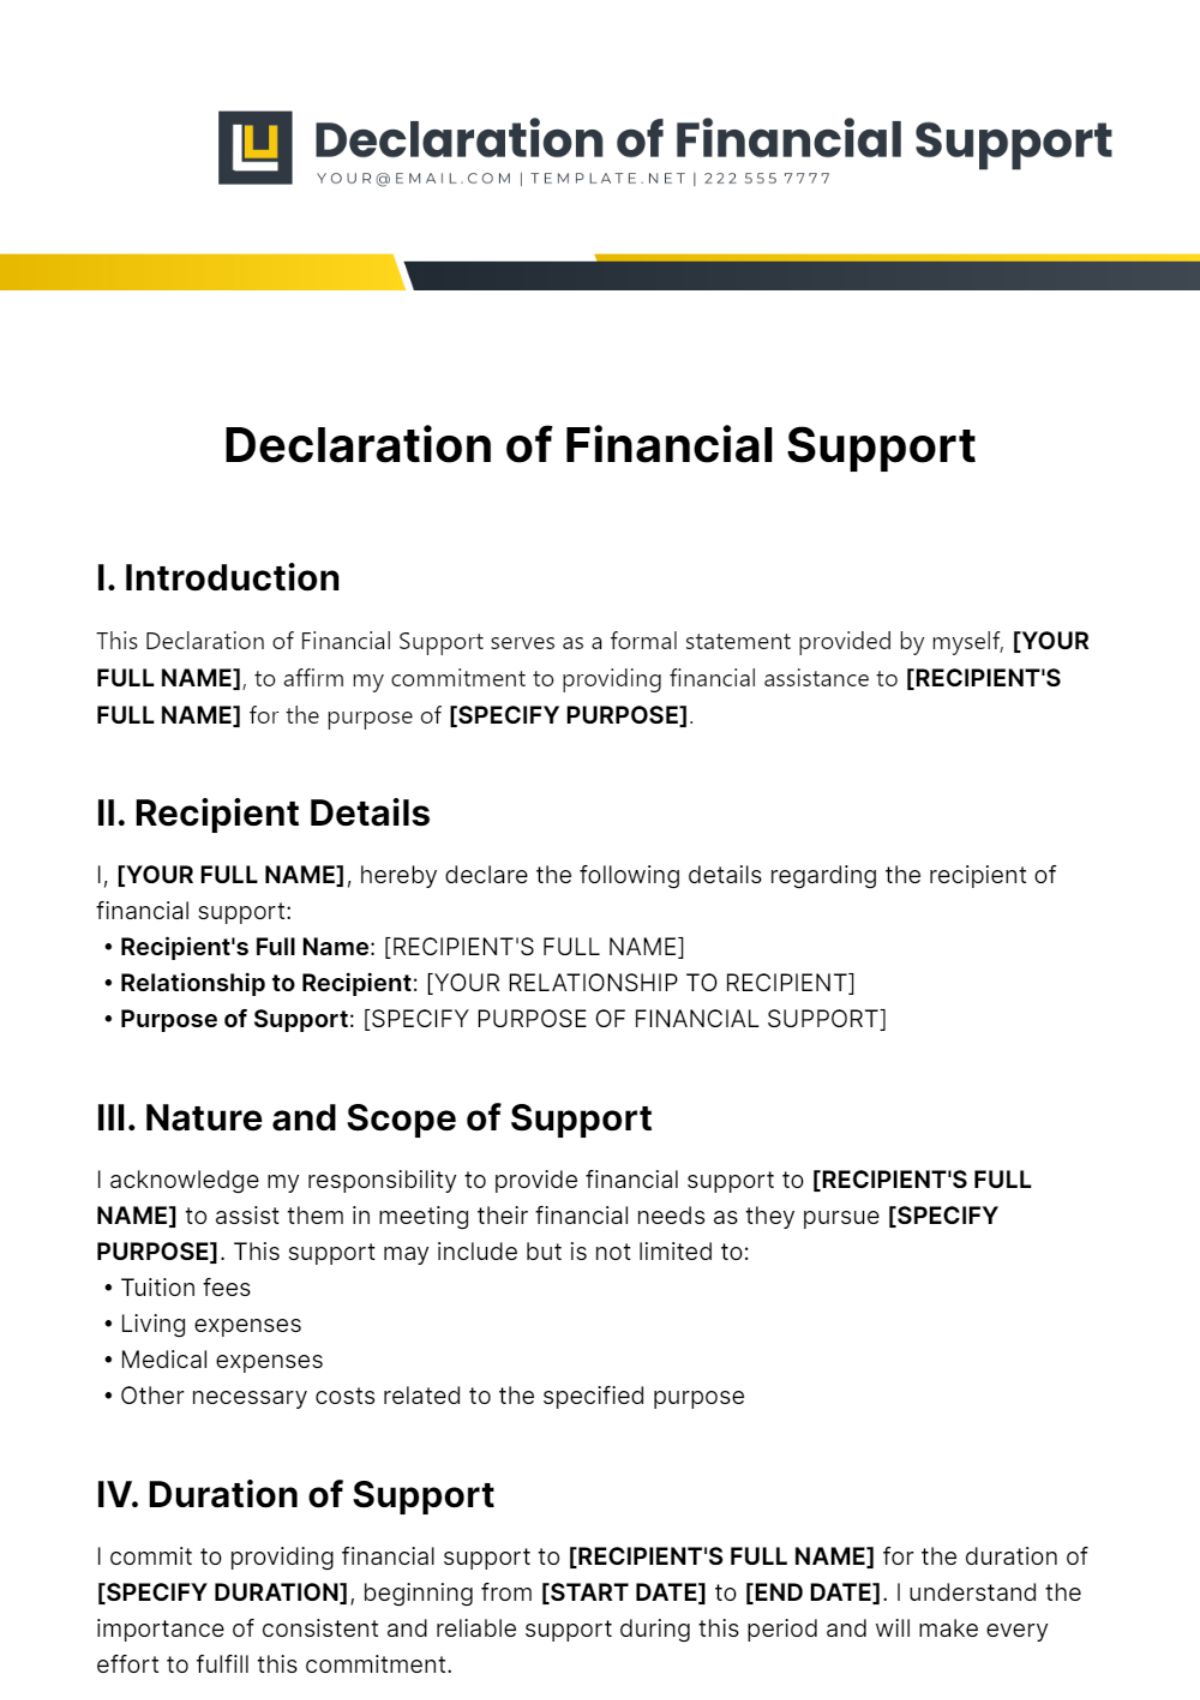 Free Declaration of Financial Support Template